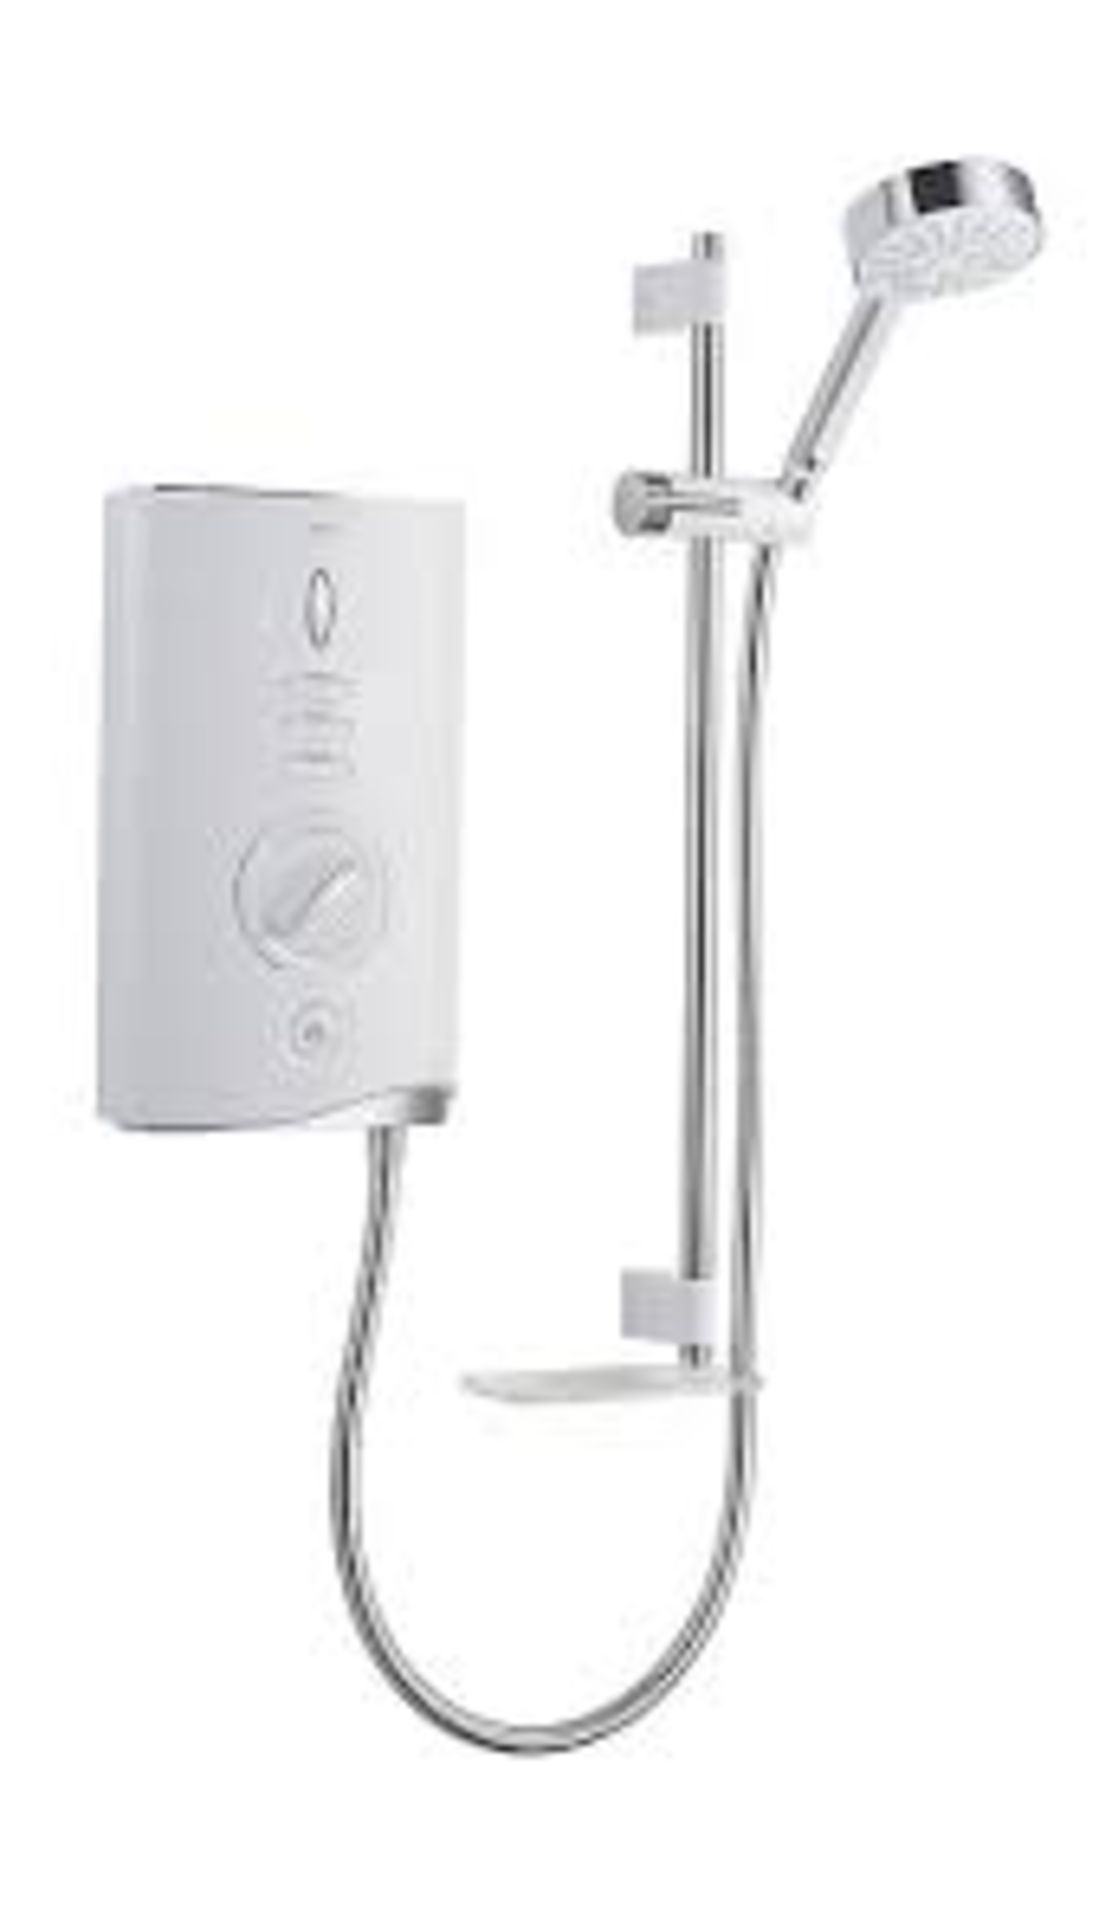 Mira Sport Max Airboost White Electric Shower, 9kW. - S2.13. Mira Sport Max Airboost white